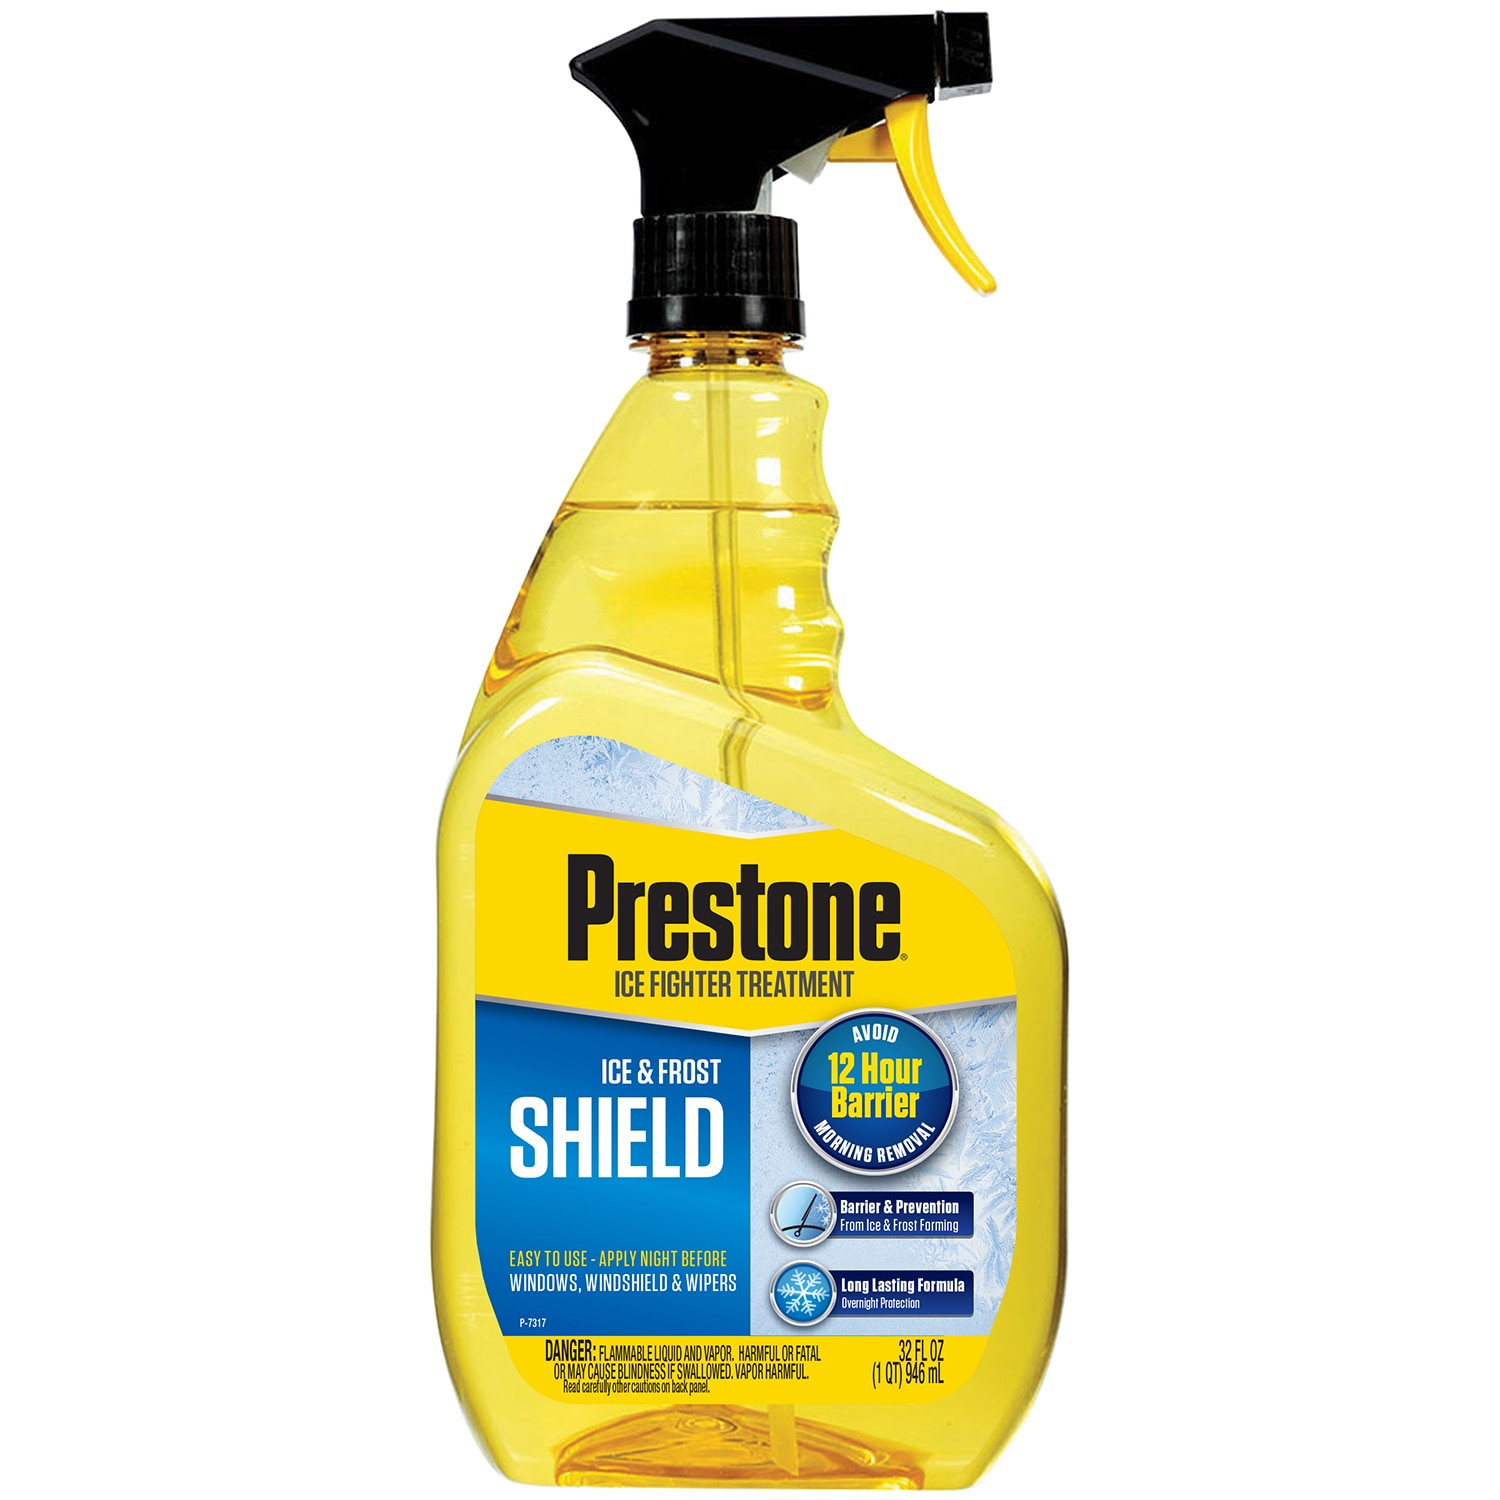 Prestone Ice and Frost Shield at